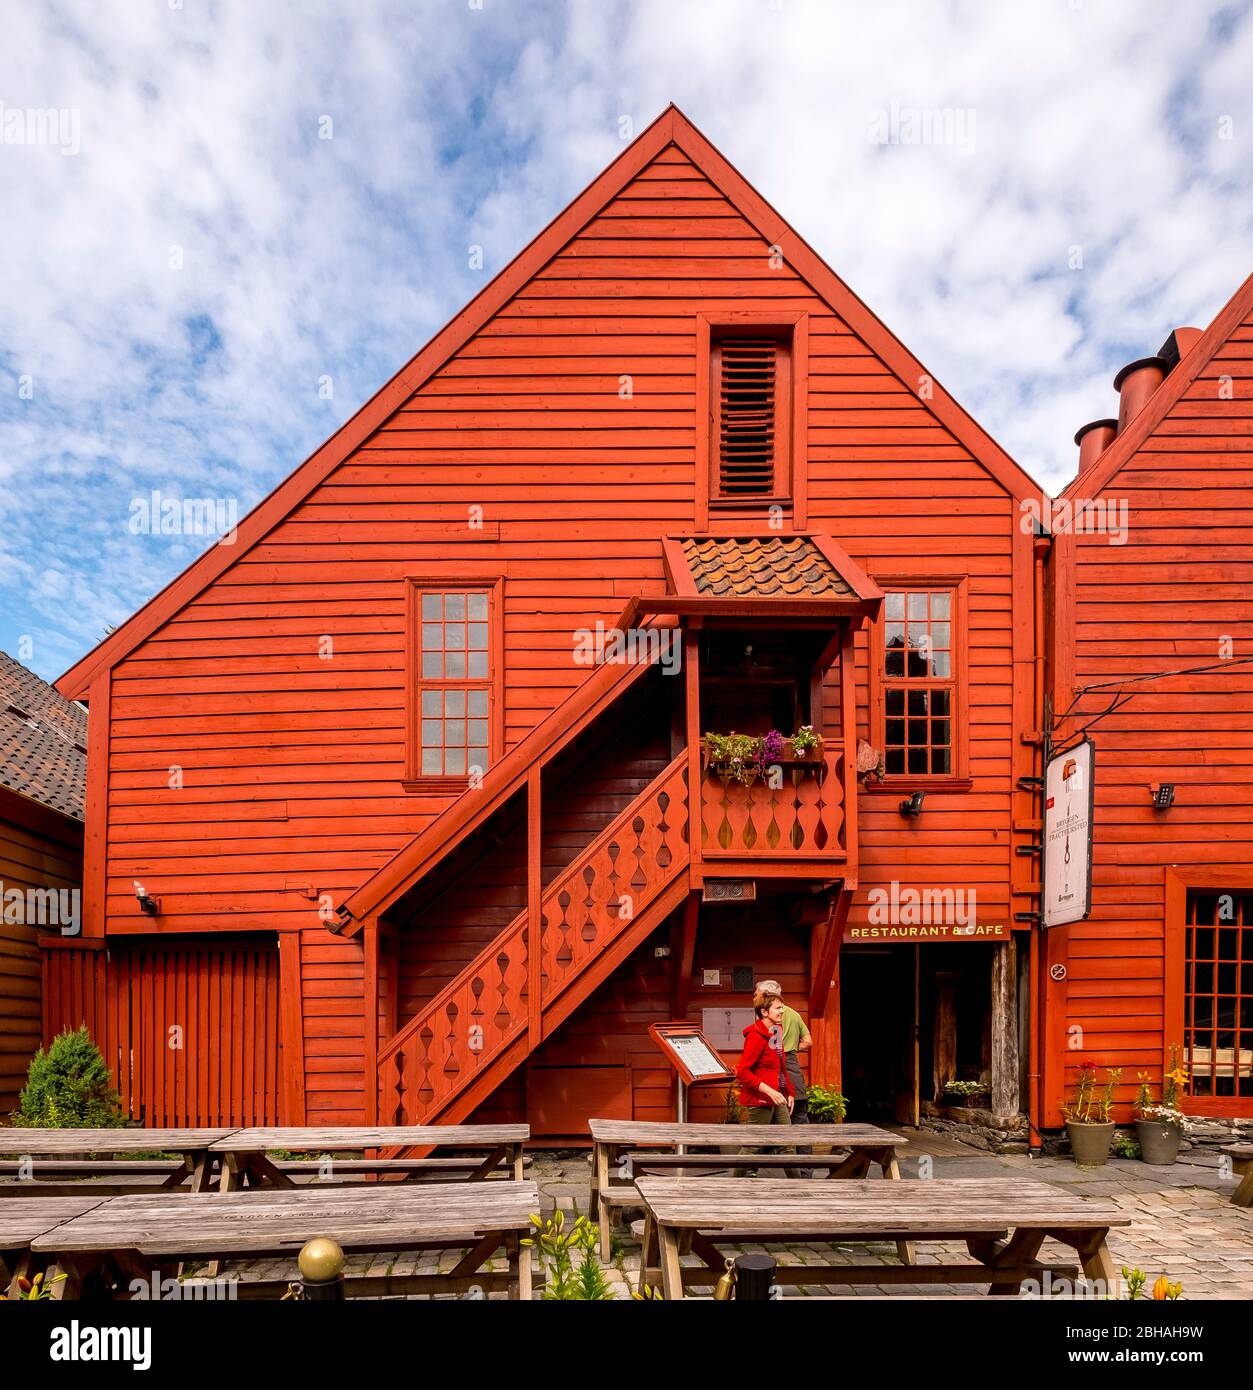 Tourists walk in front of a sculptural wooden house with wooden staircase, surrounded by a paved courtyard on the tables and benches, decorated with flower tubs, in Bryggen, Bergen, Hordaland, Norway, Scandinavia, Europe Stock Photo